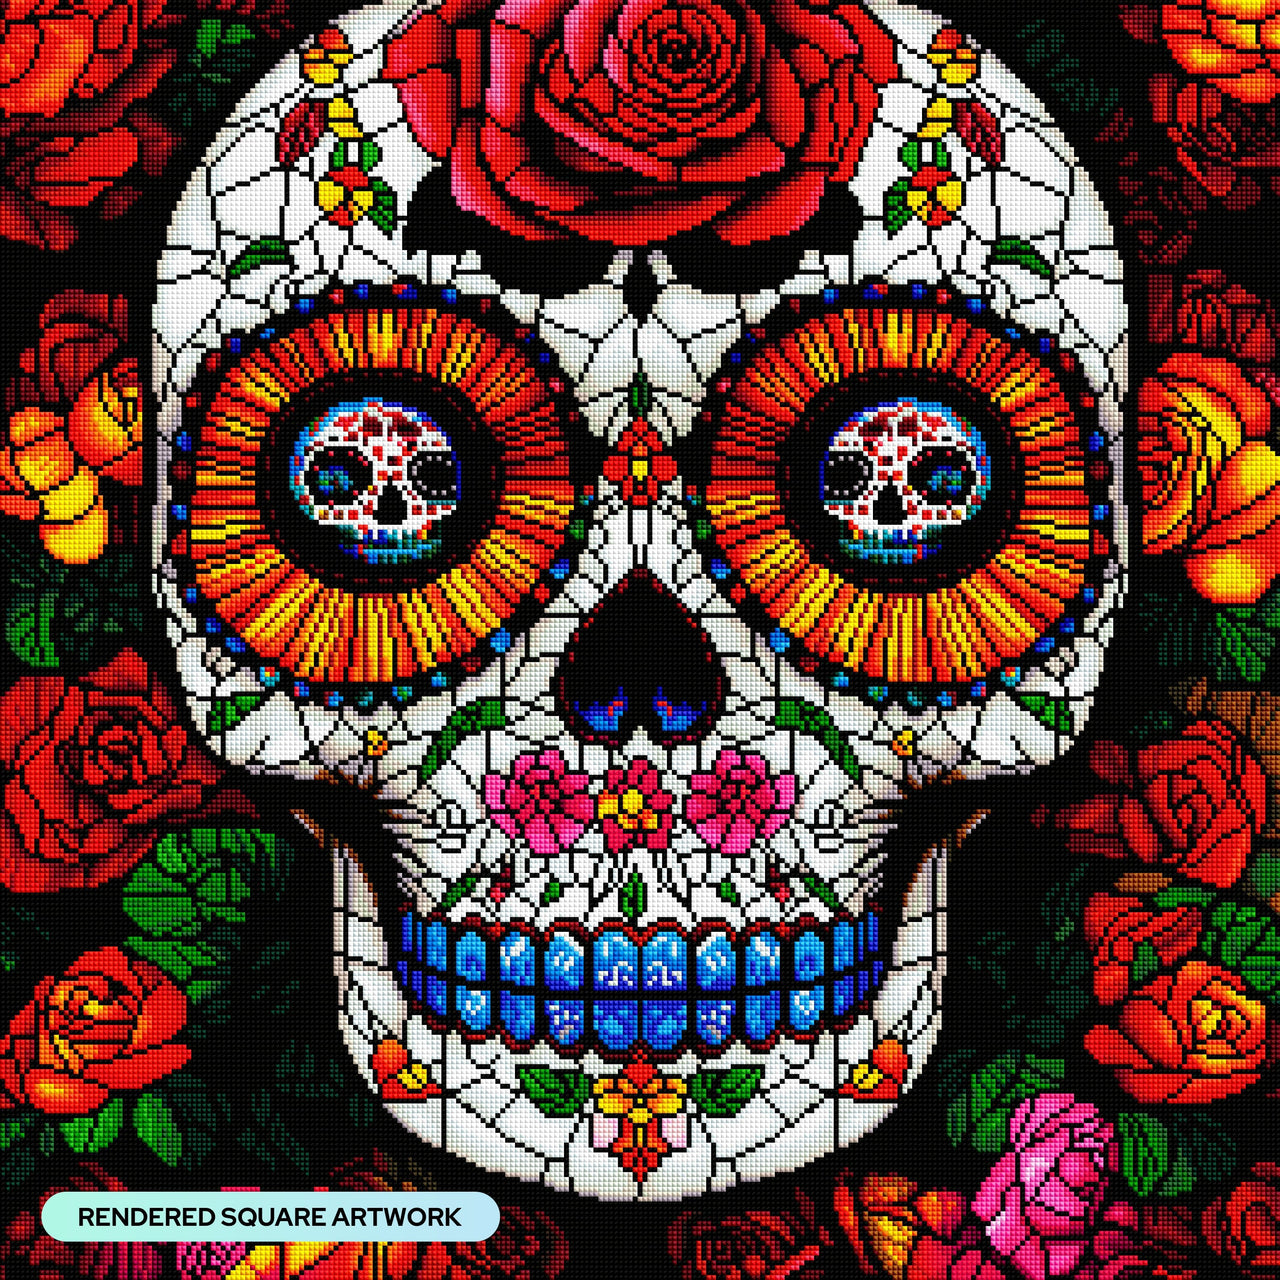 Diamond Painting Stained Glass Sugar Skull 25.6" x 25.6" (65cm x 65cm) / Square with 40 Colors including 5 ABs and 1 Fairy Dust Diamonds / 68,121